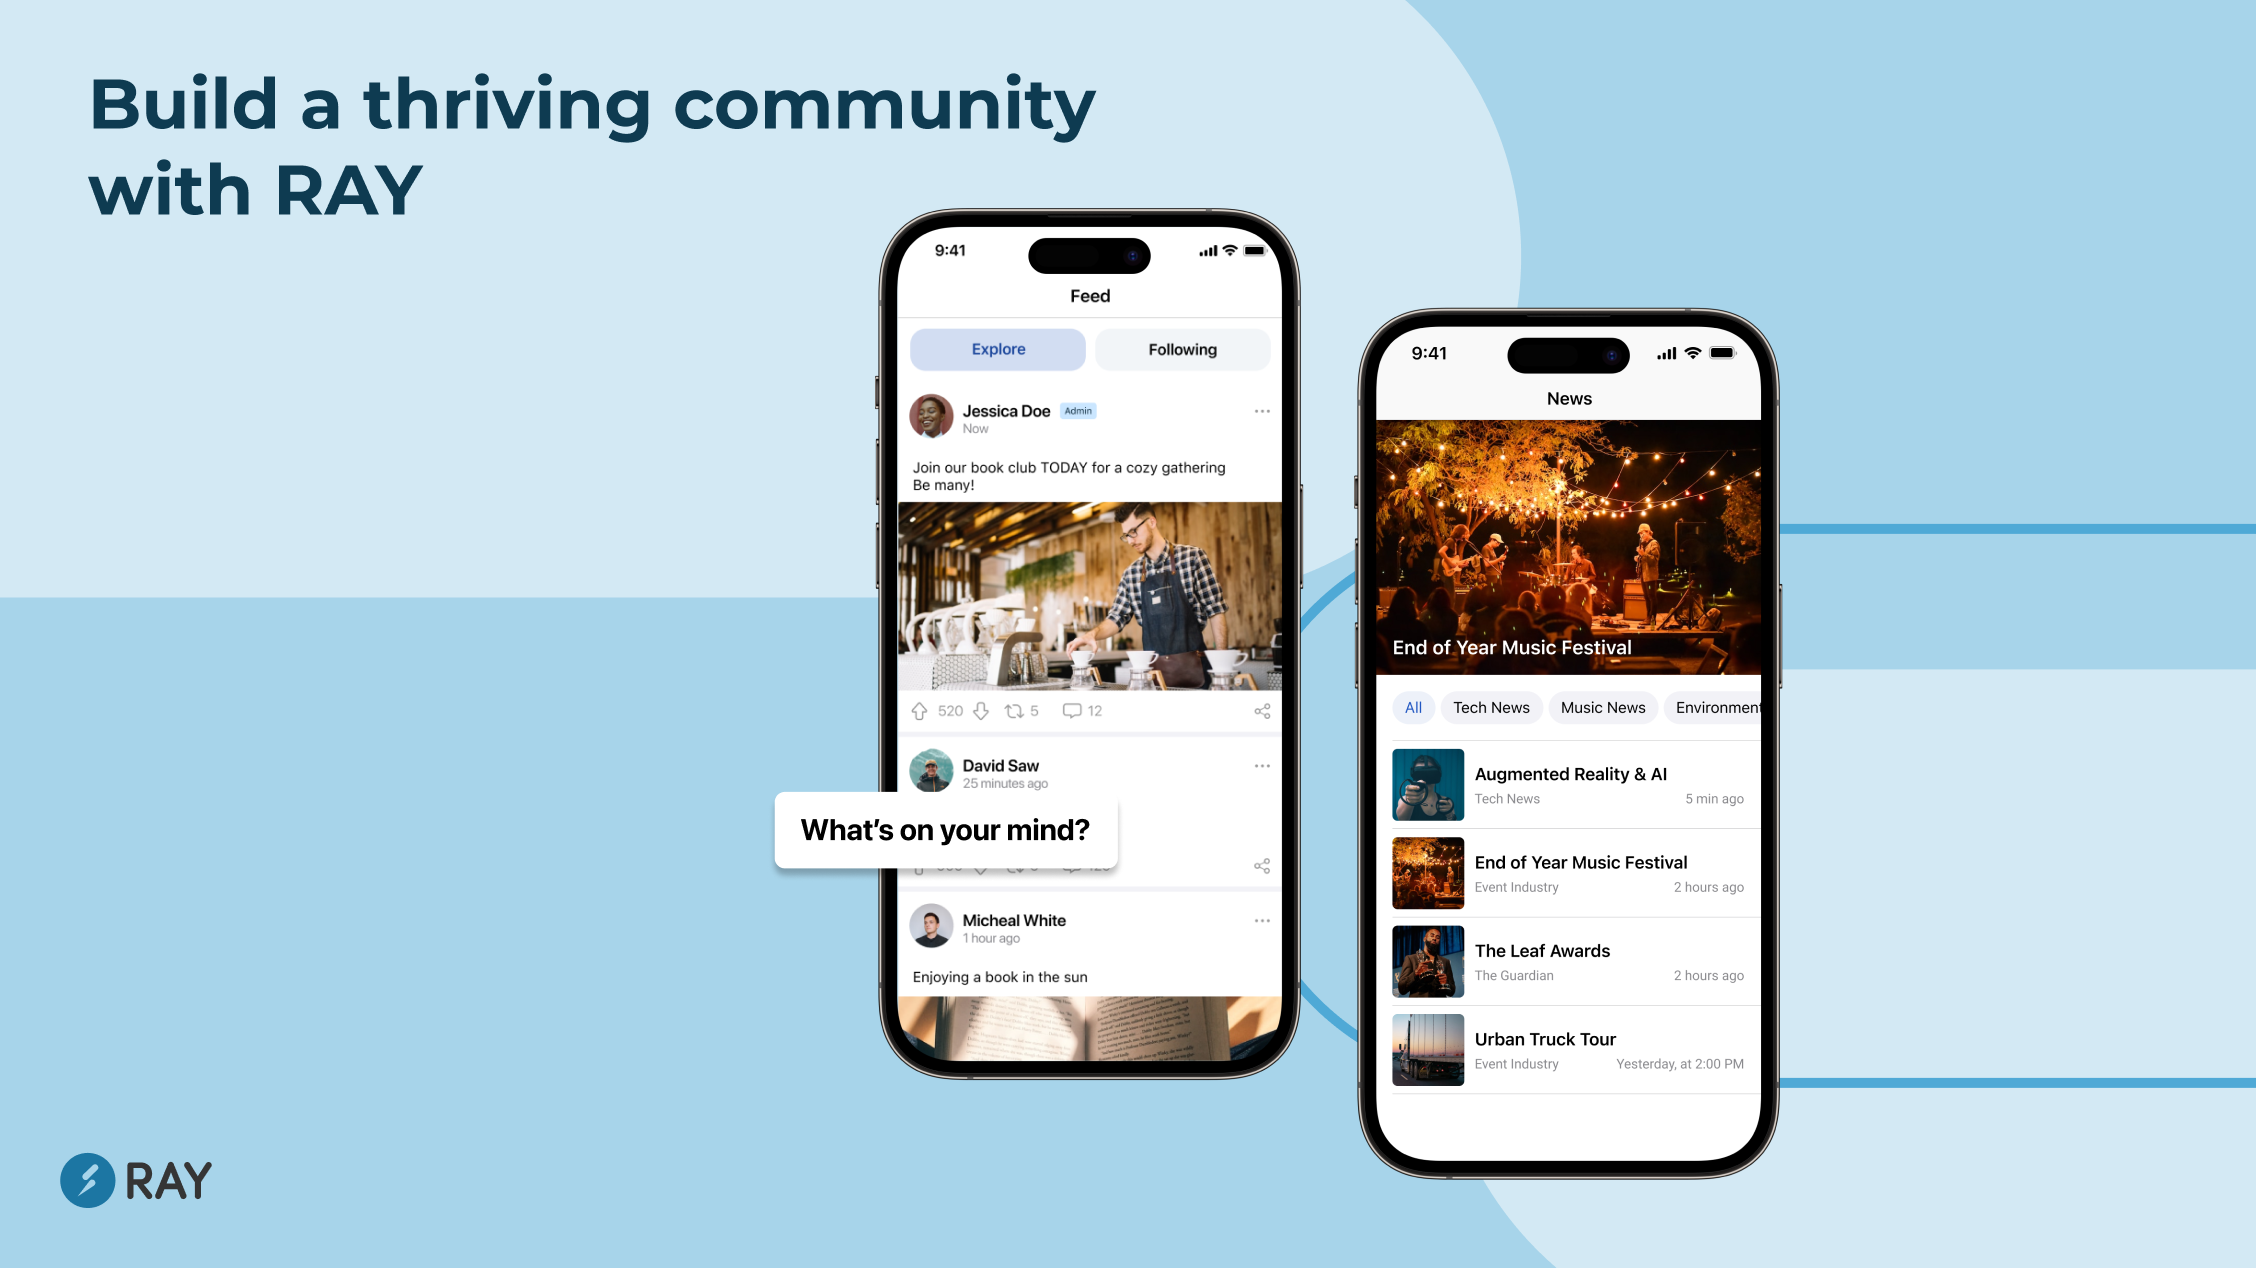 Build a thriving community with RAY!